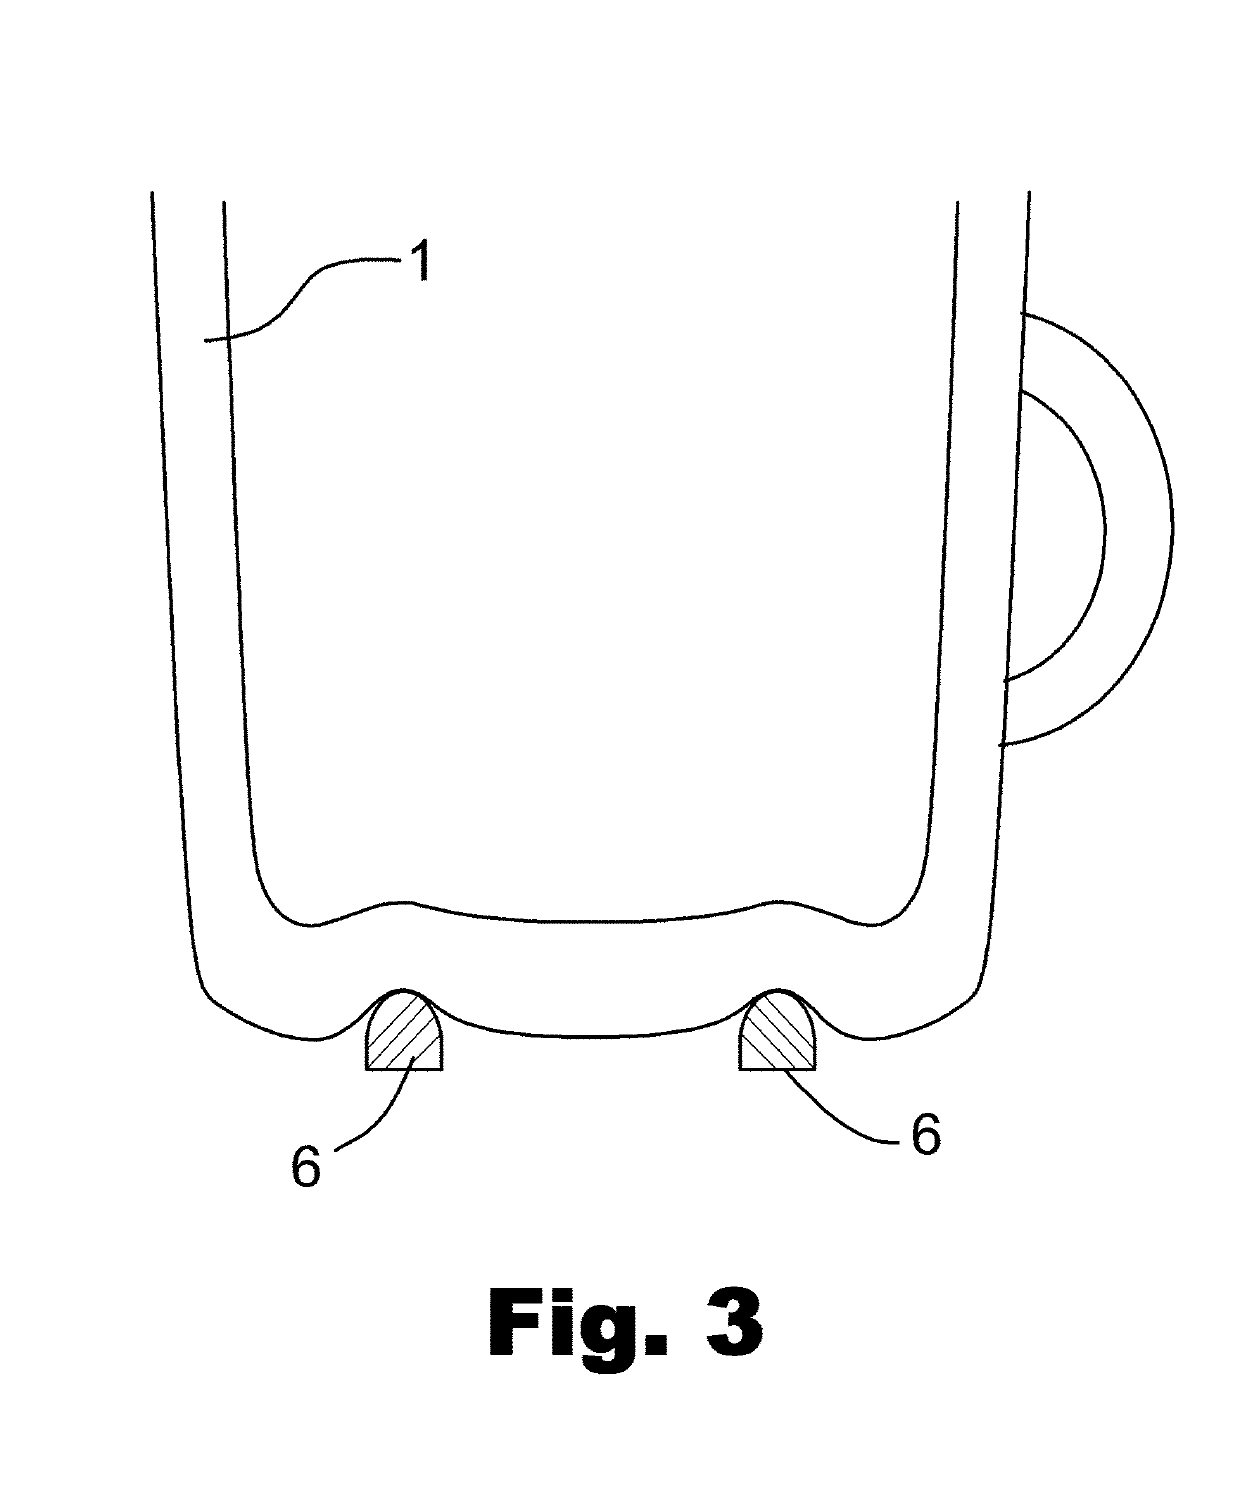 Cup Resistant to Both Slipping and Tipping